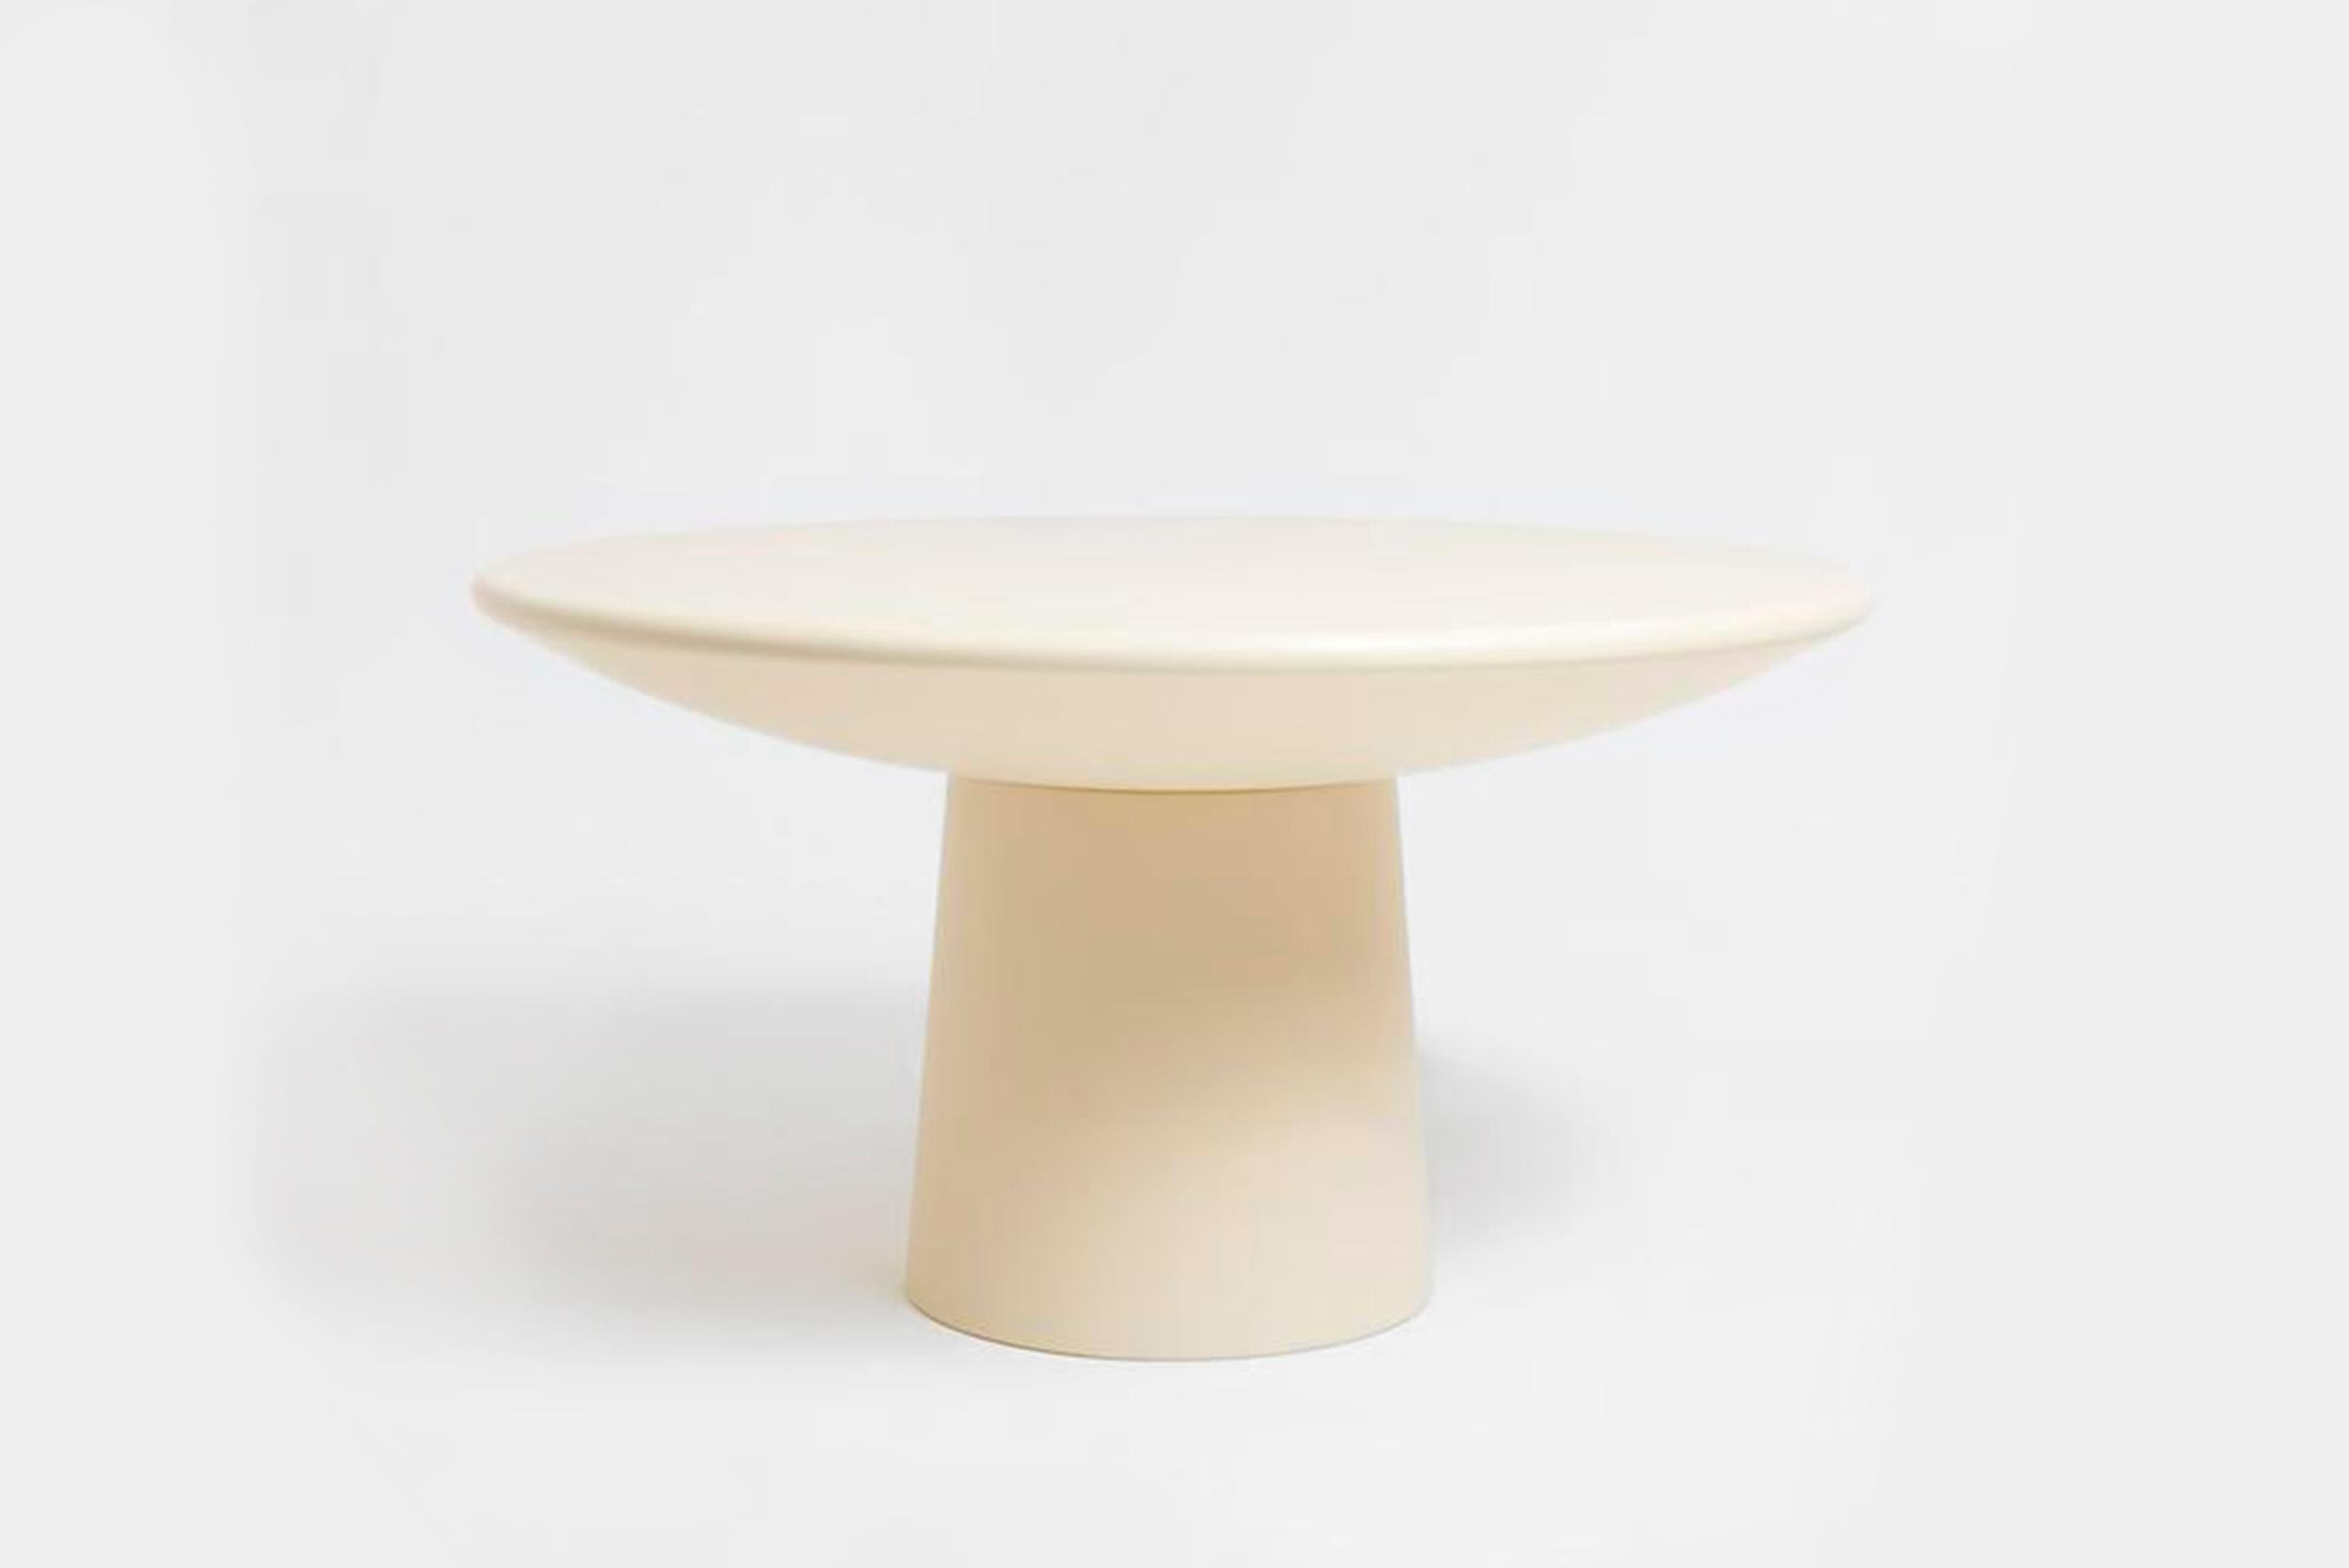 Faye Toogood
Roly poly dining table
Manufactured by Faye Toogood
London, 2019
Fiberglass

Measurements:
140 cm diameter x 75 cm height
55.12 in diameter x 29.53 in height

Colors:
– Cream
– Charcoal
– Raw

Concept:
Faye Toogood